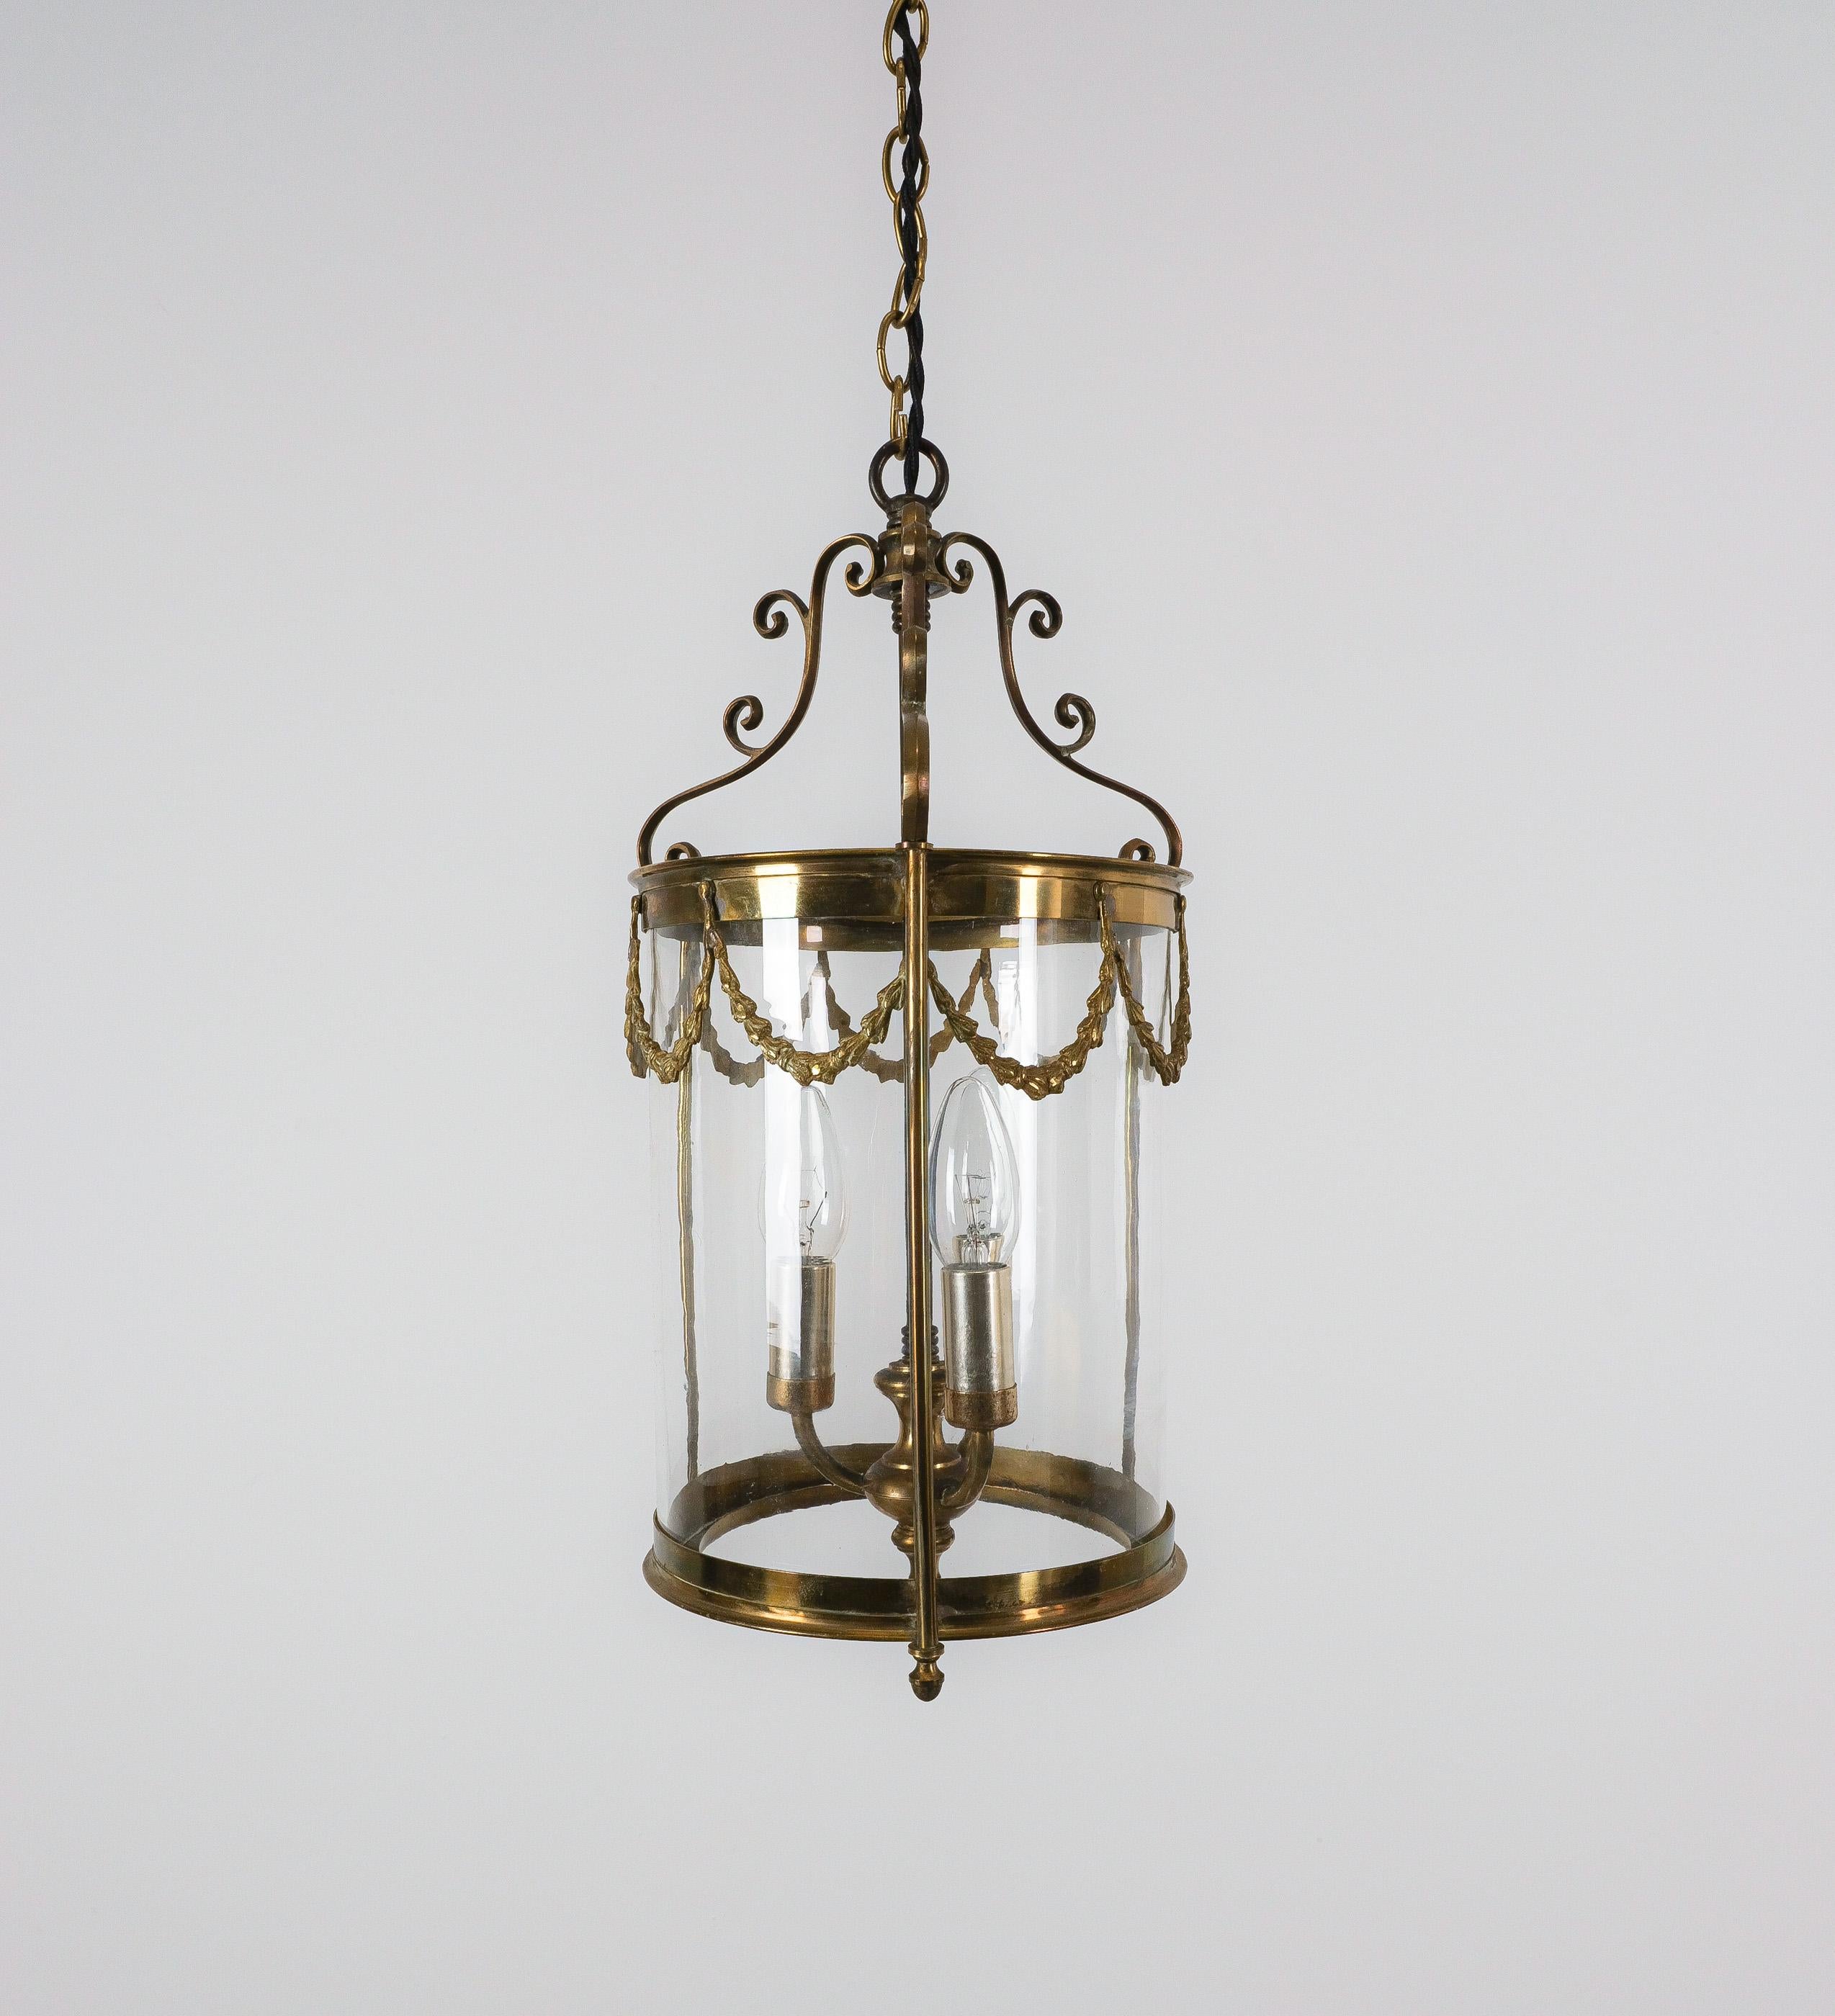 Pair of Neo-Empire Pendant Lights from Glass and Brass, France 1950 For Sale 1